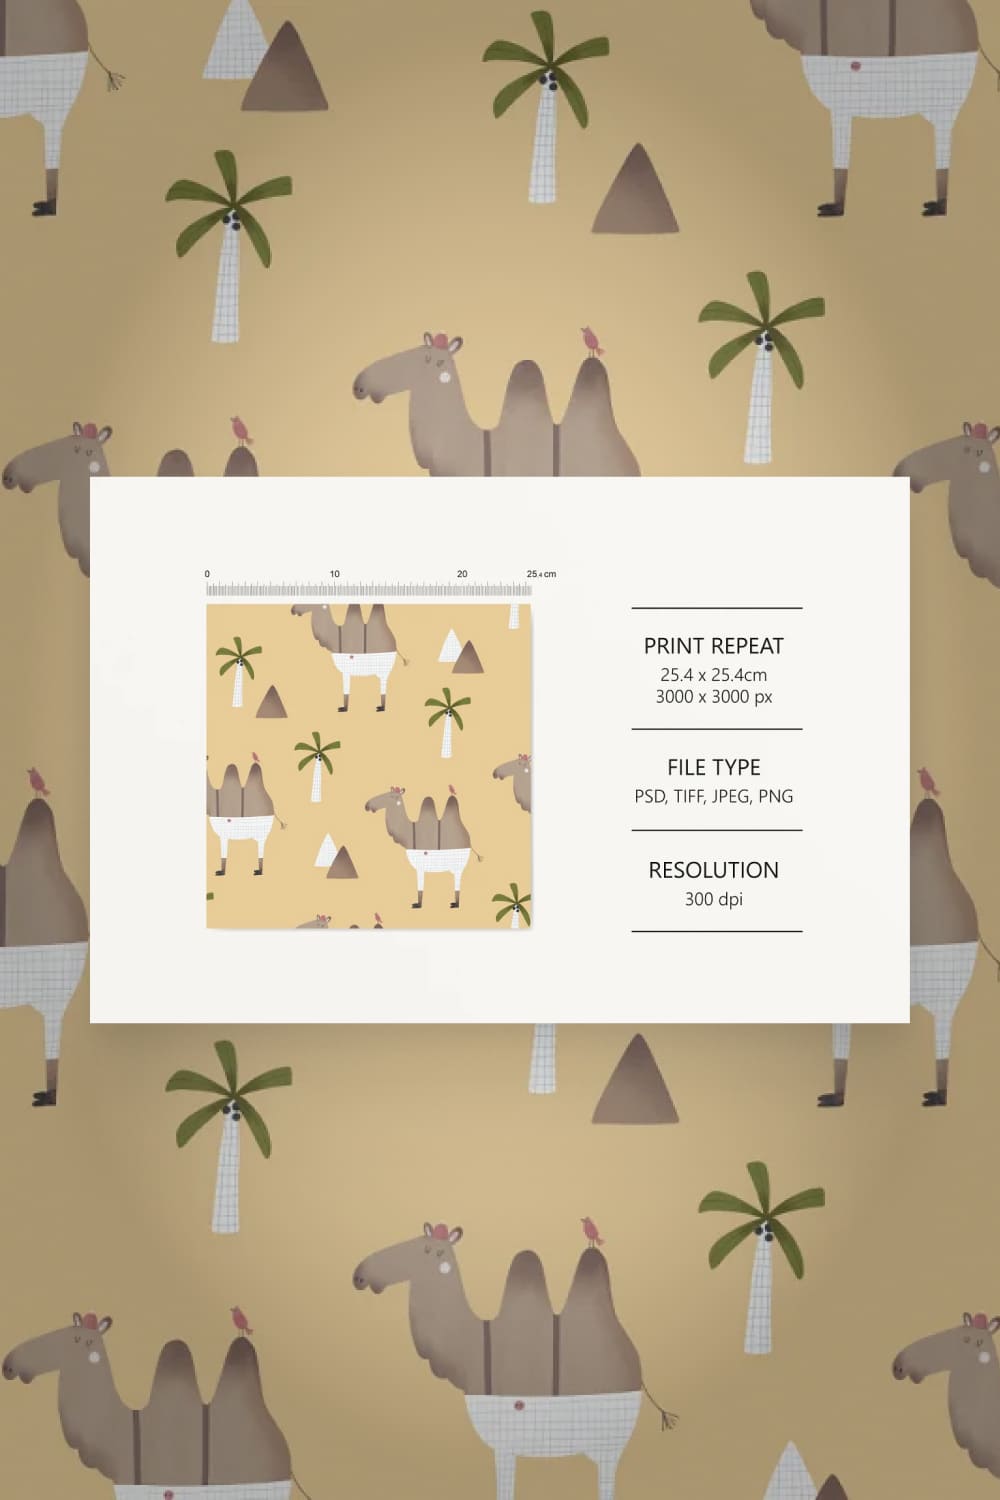 Camel print for your project.